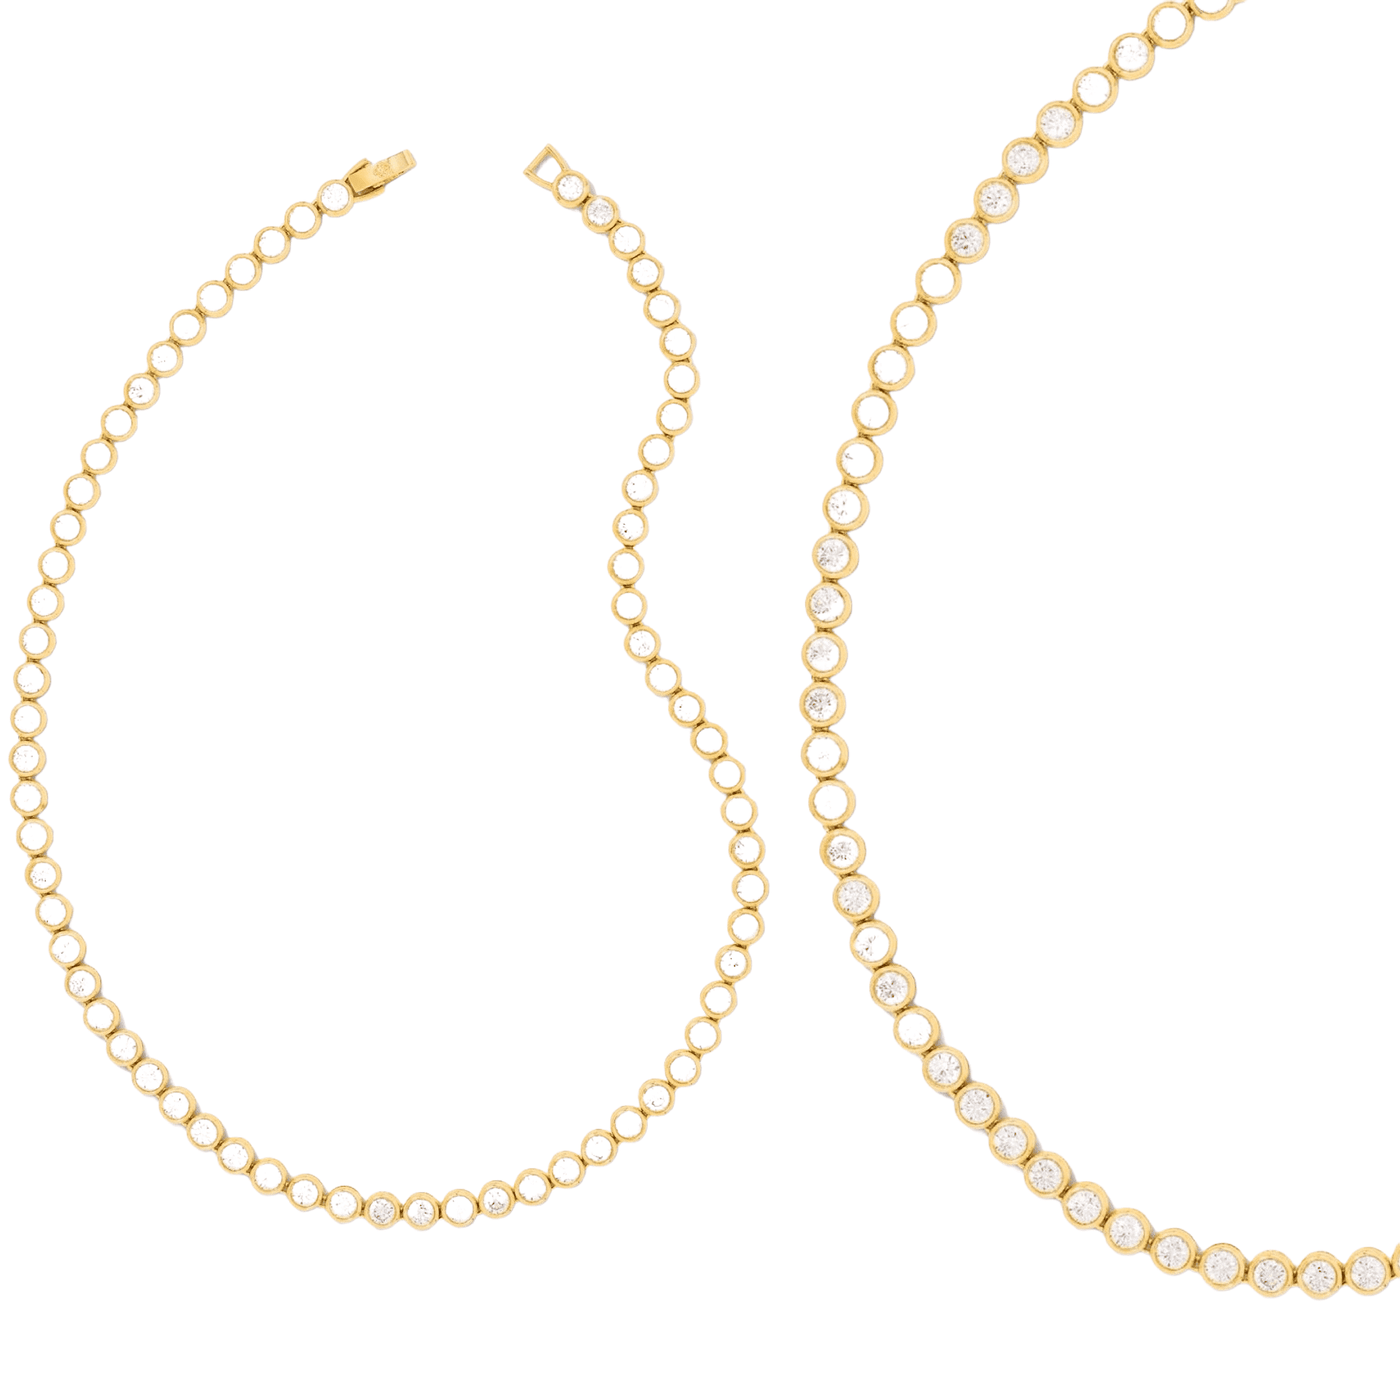 Kendra Scott Carmen Gold Tennis Necklace in White Crystal